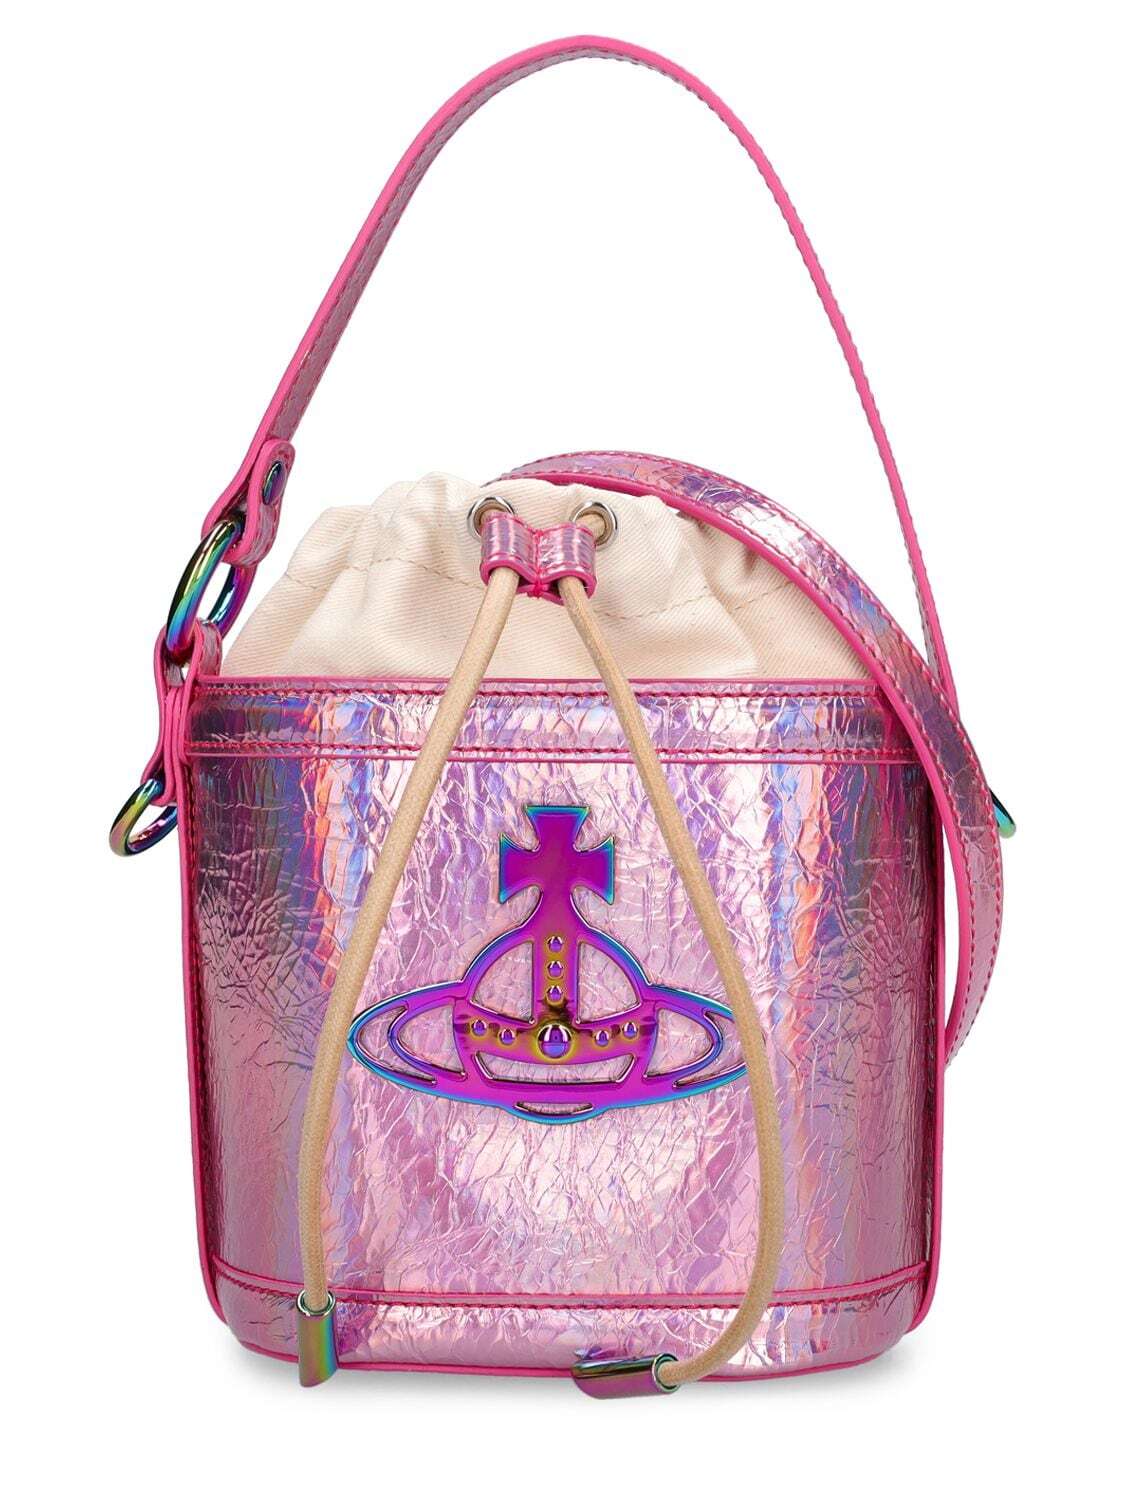 VIVIENNE WESTWOOD Daisy Iridescent Faux Leather Bucket Bag in pink